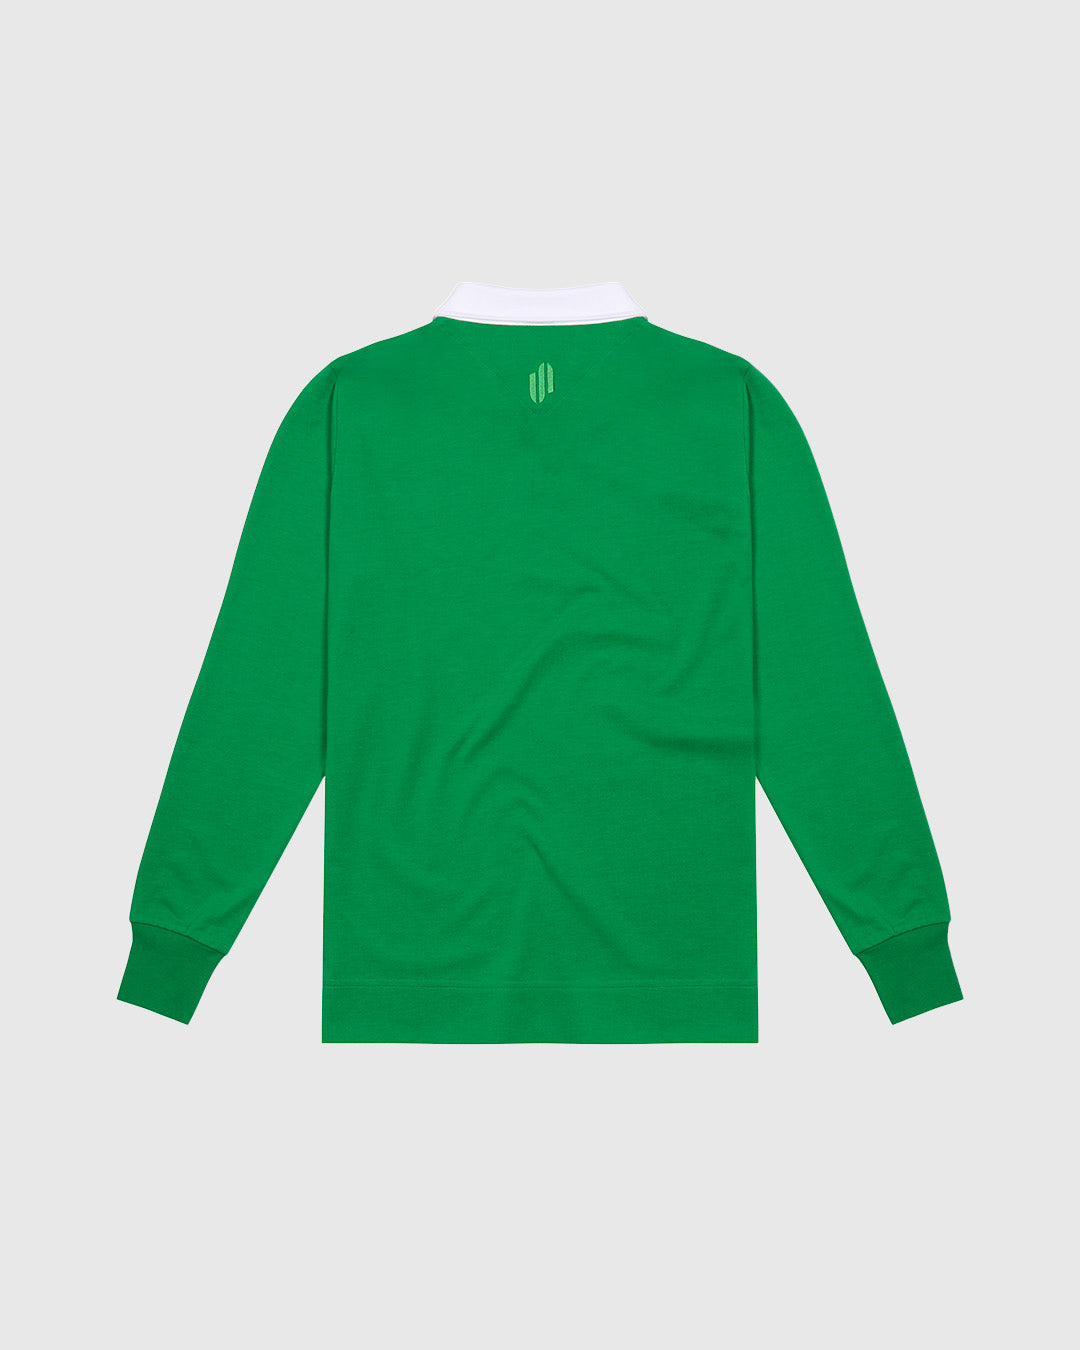 VC: IRL - Women's Vintage Rugby Shirt - Ireland